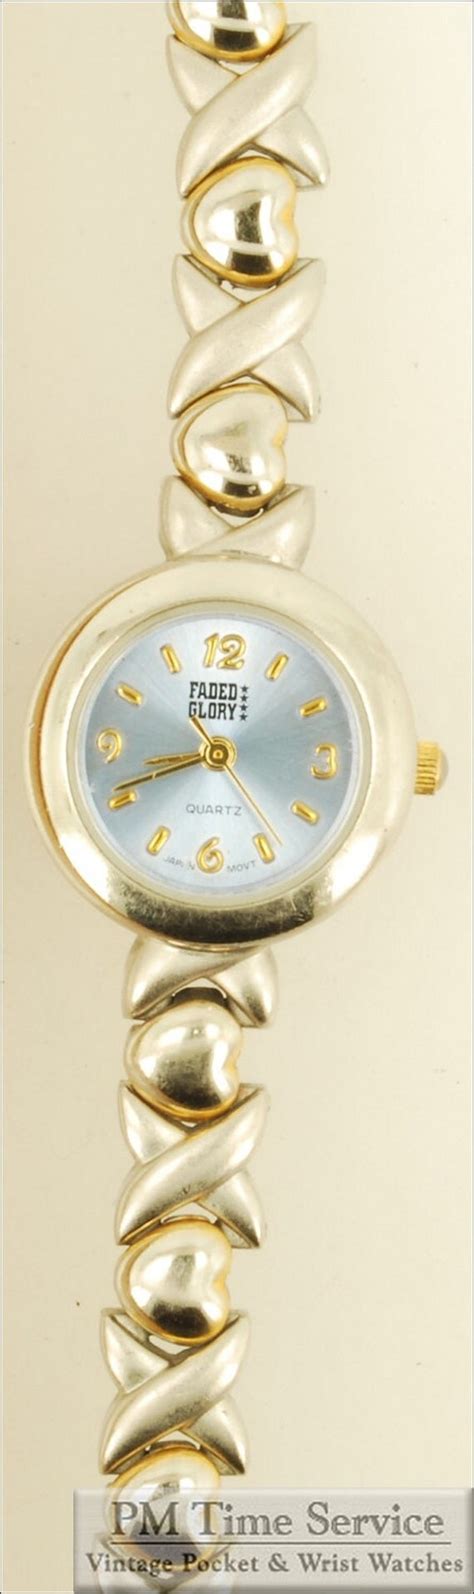 Faded Glory Vintage Quartz Wrist Watch Silver Toned And By Pmtime